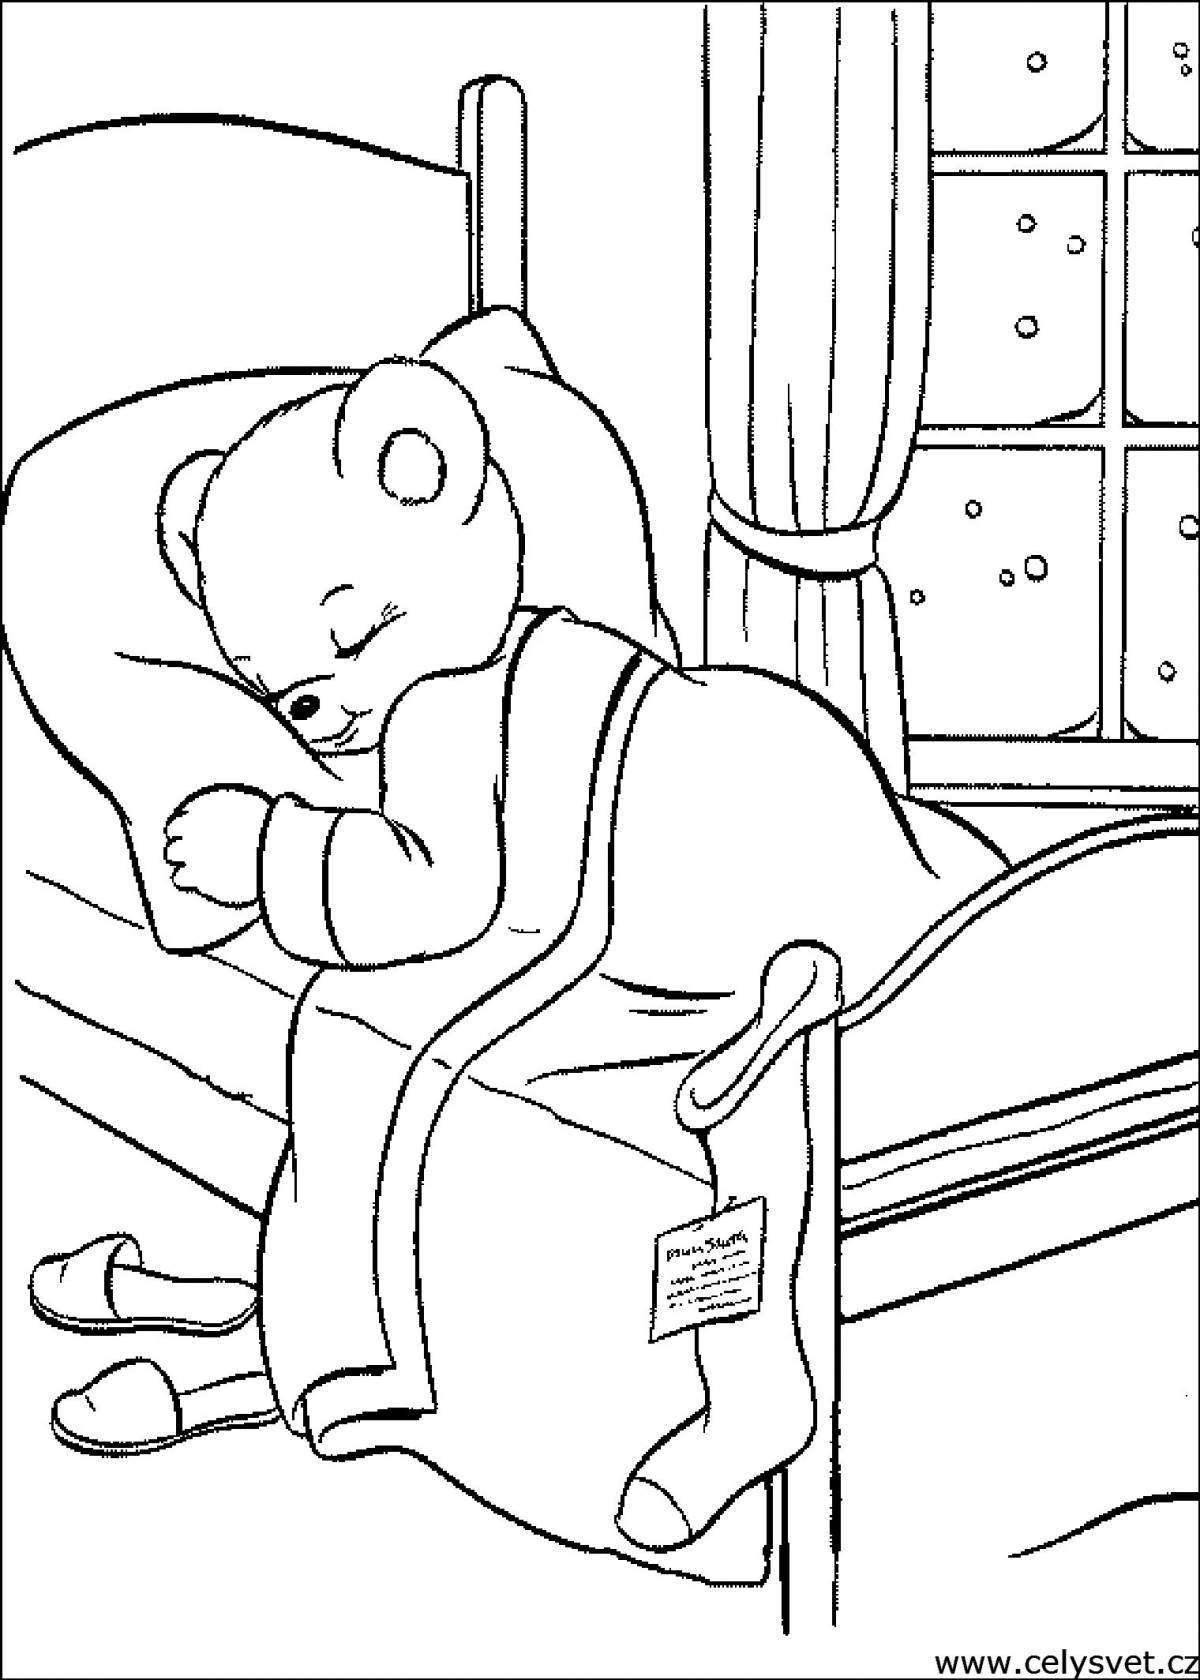 Wonderful children sleeping coloring pages